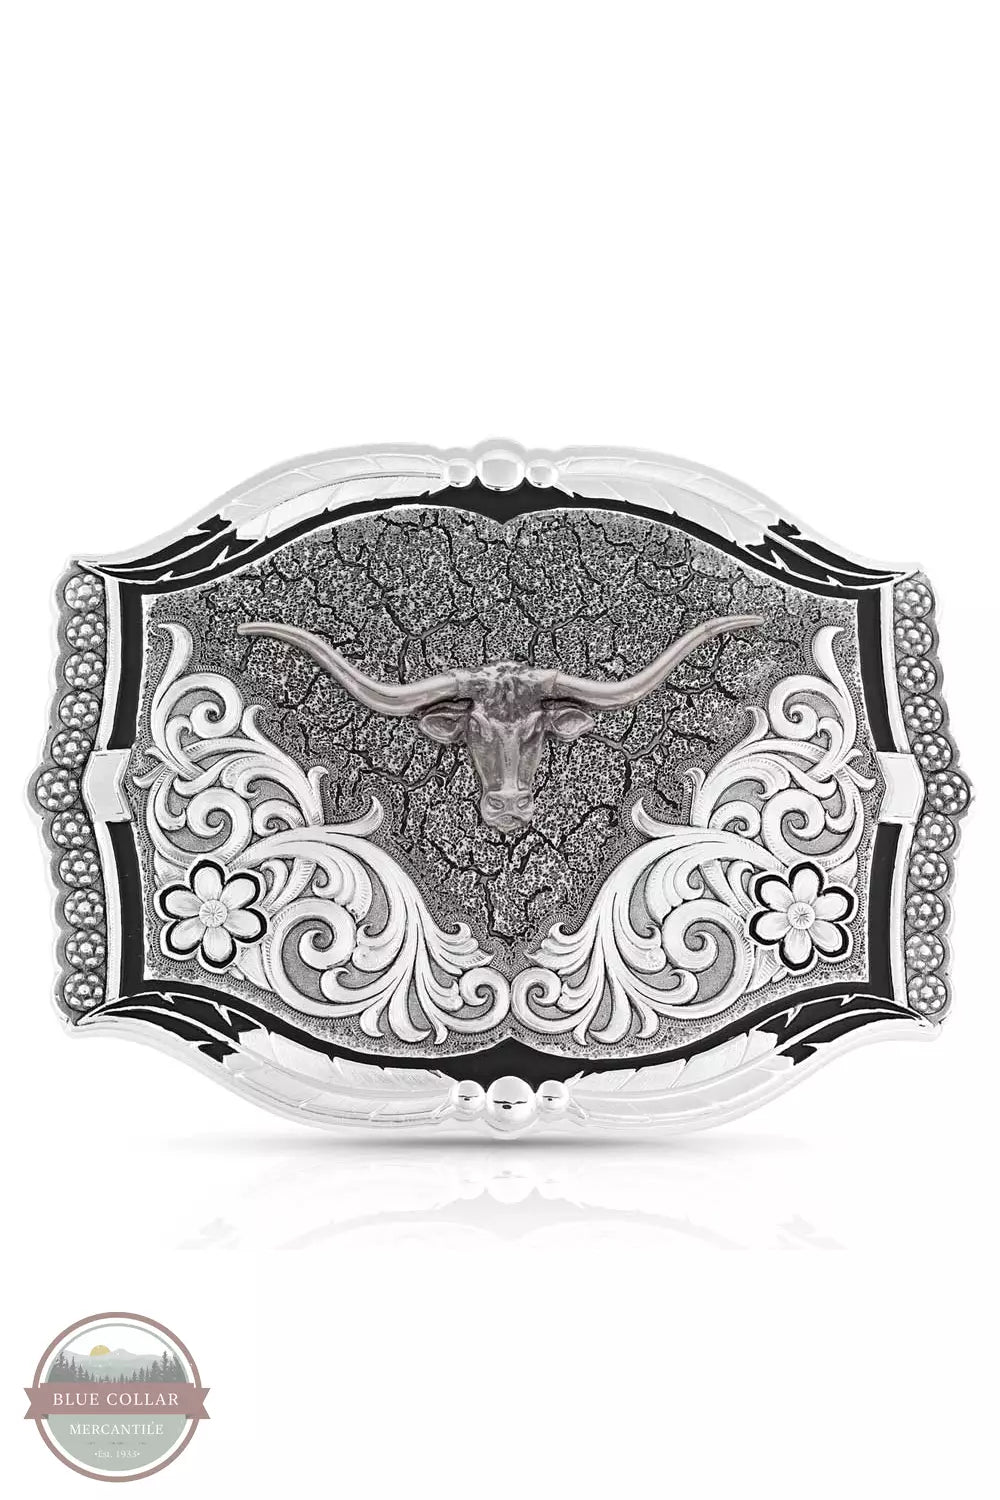 Montana Silversmith 43810S-771 Cracked Earth Monochrome Longhorn Buckle Front View